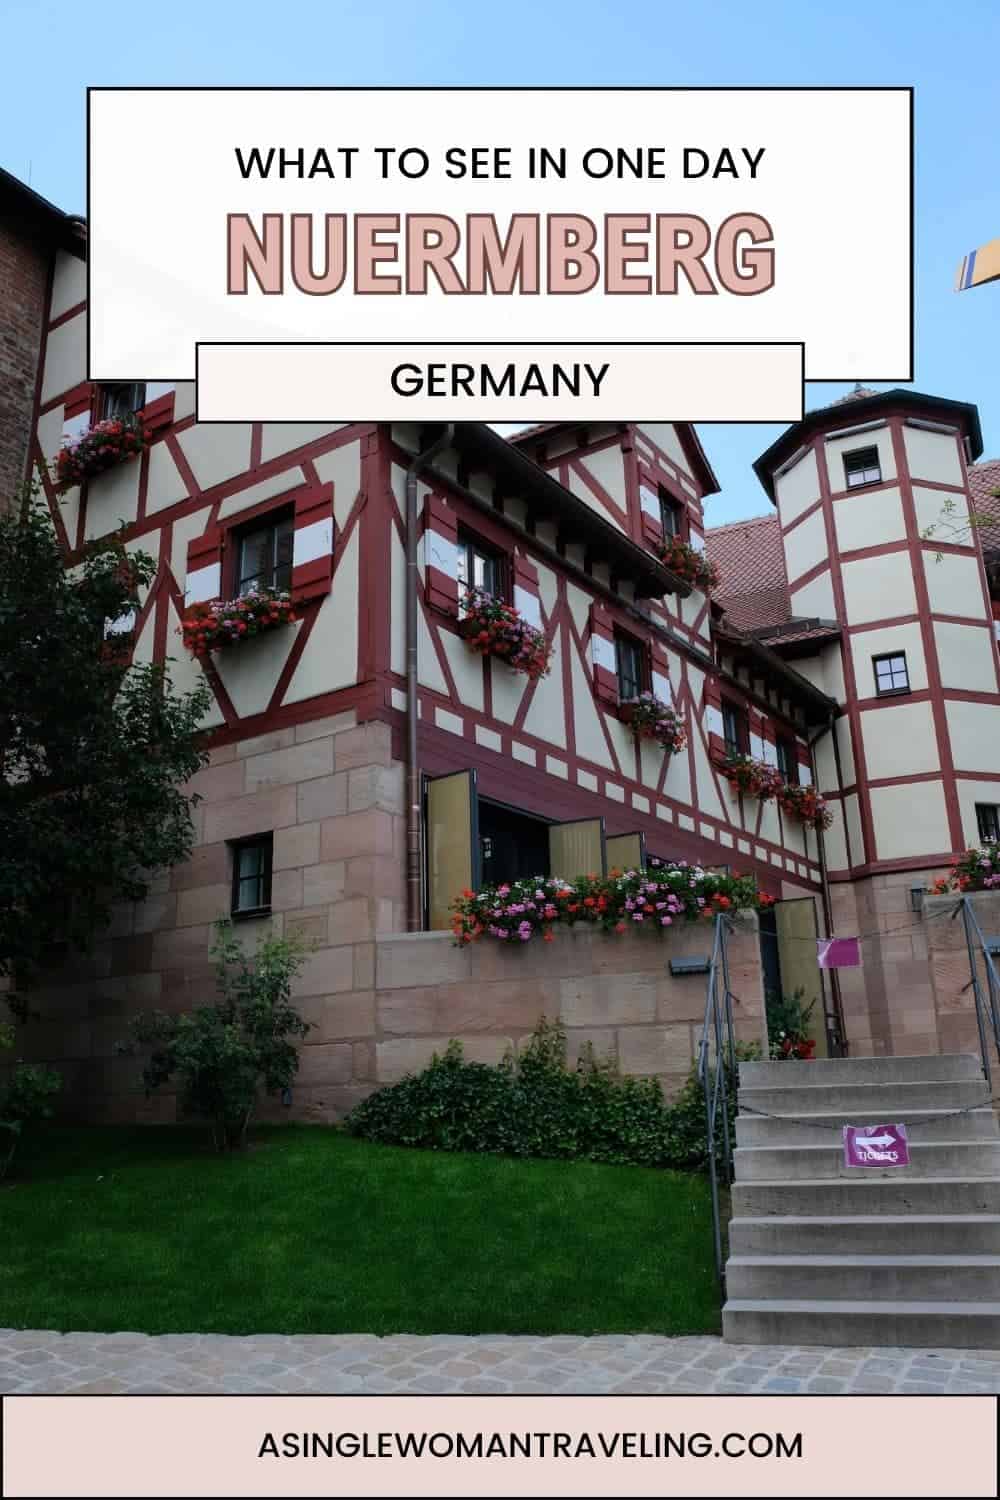 A Pinterest pin featuring a traditional half-timbered building in Nuremberg, adorned with bright flower boxes. The bold text 'WHAT TO SEE IN ONE DAY NUREMBERG Germany' overlays the image, inviting potential visitors to explore the city's historic charm. The website 'ASINGLEWOMANTRAVELING.COM' is credited at the bottom